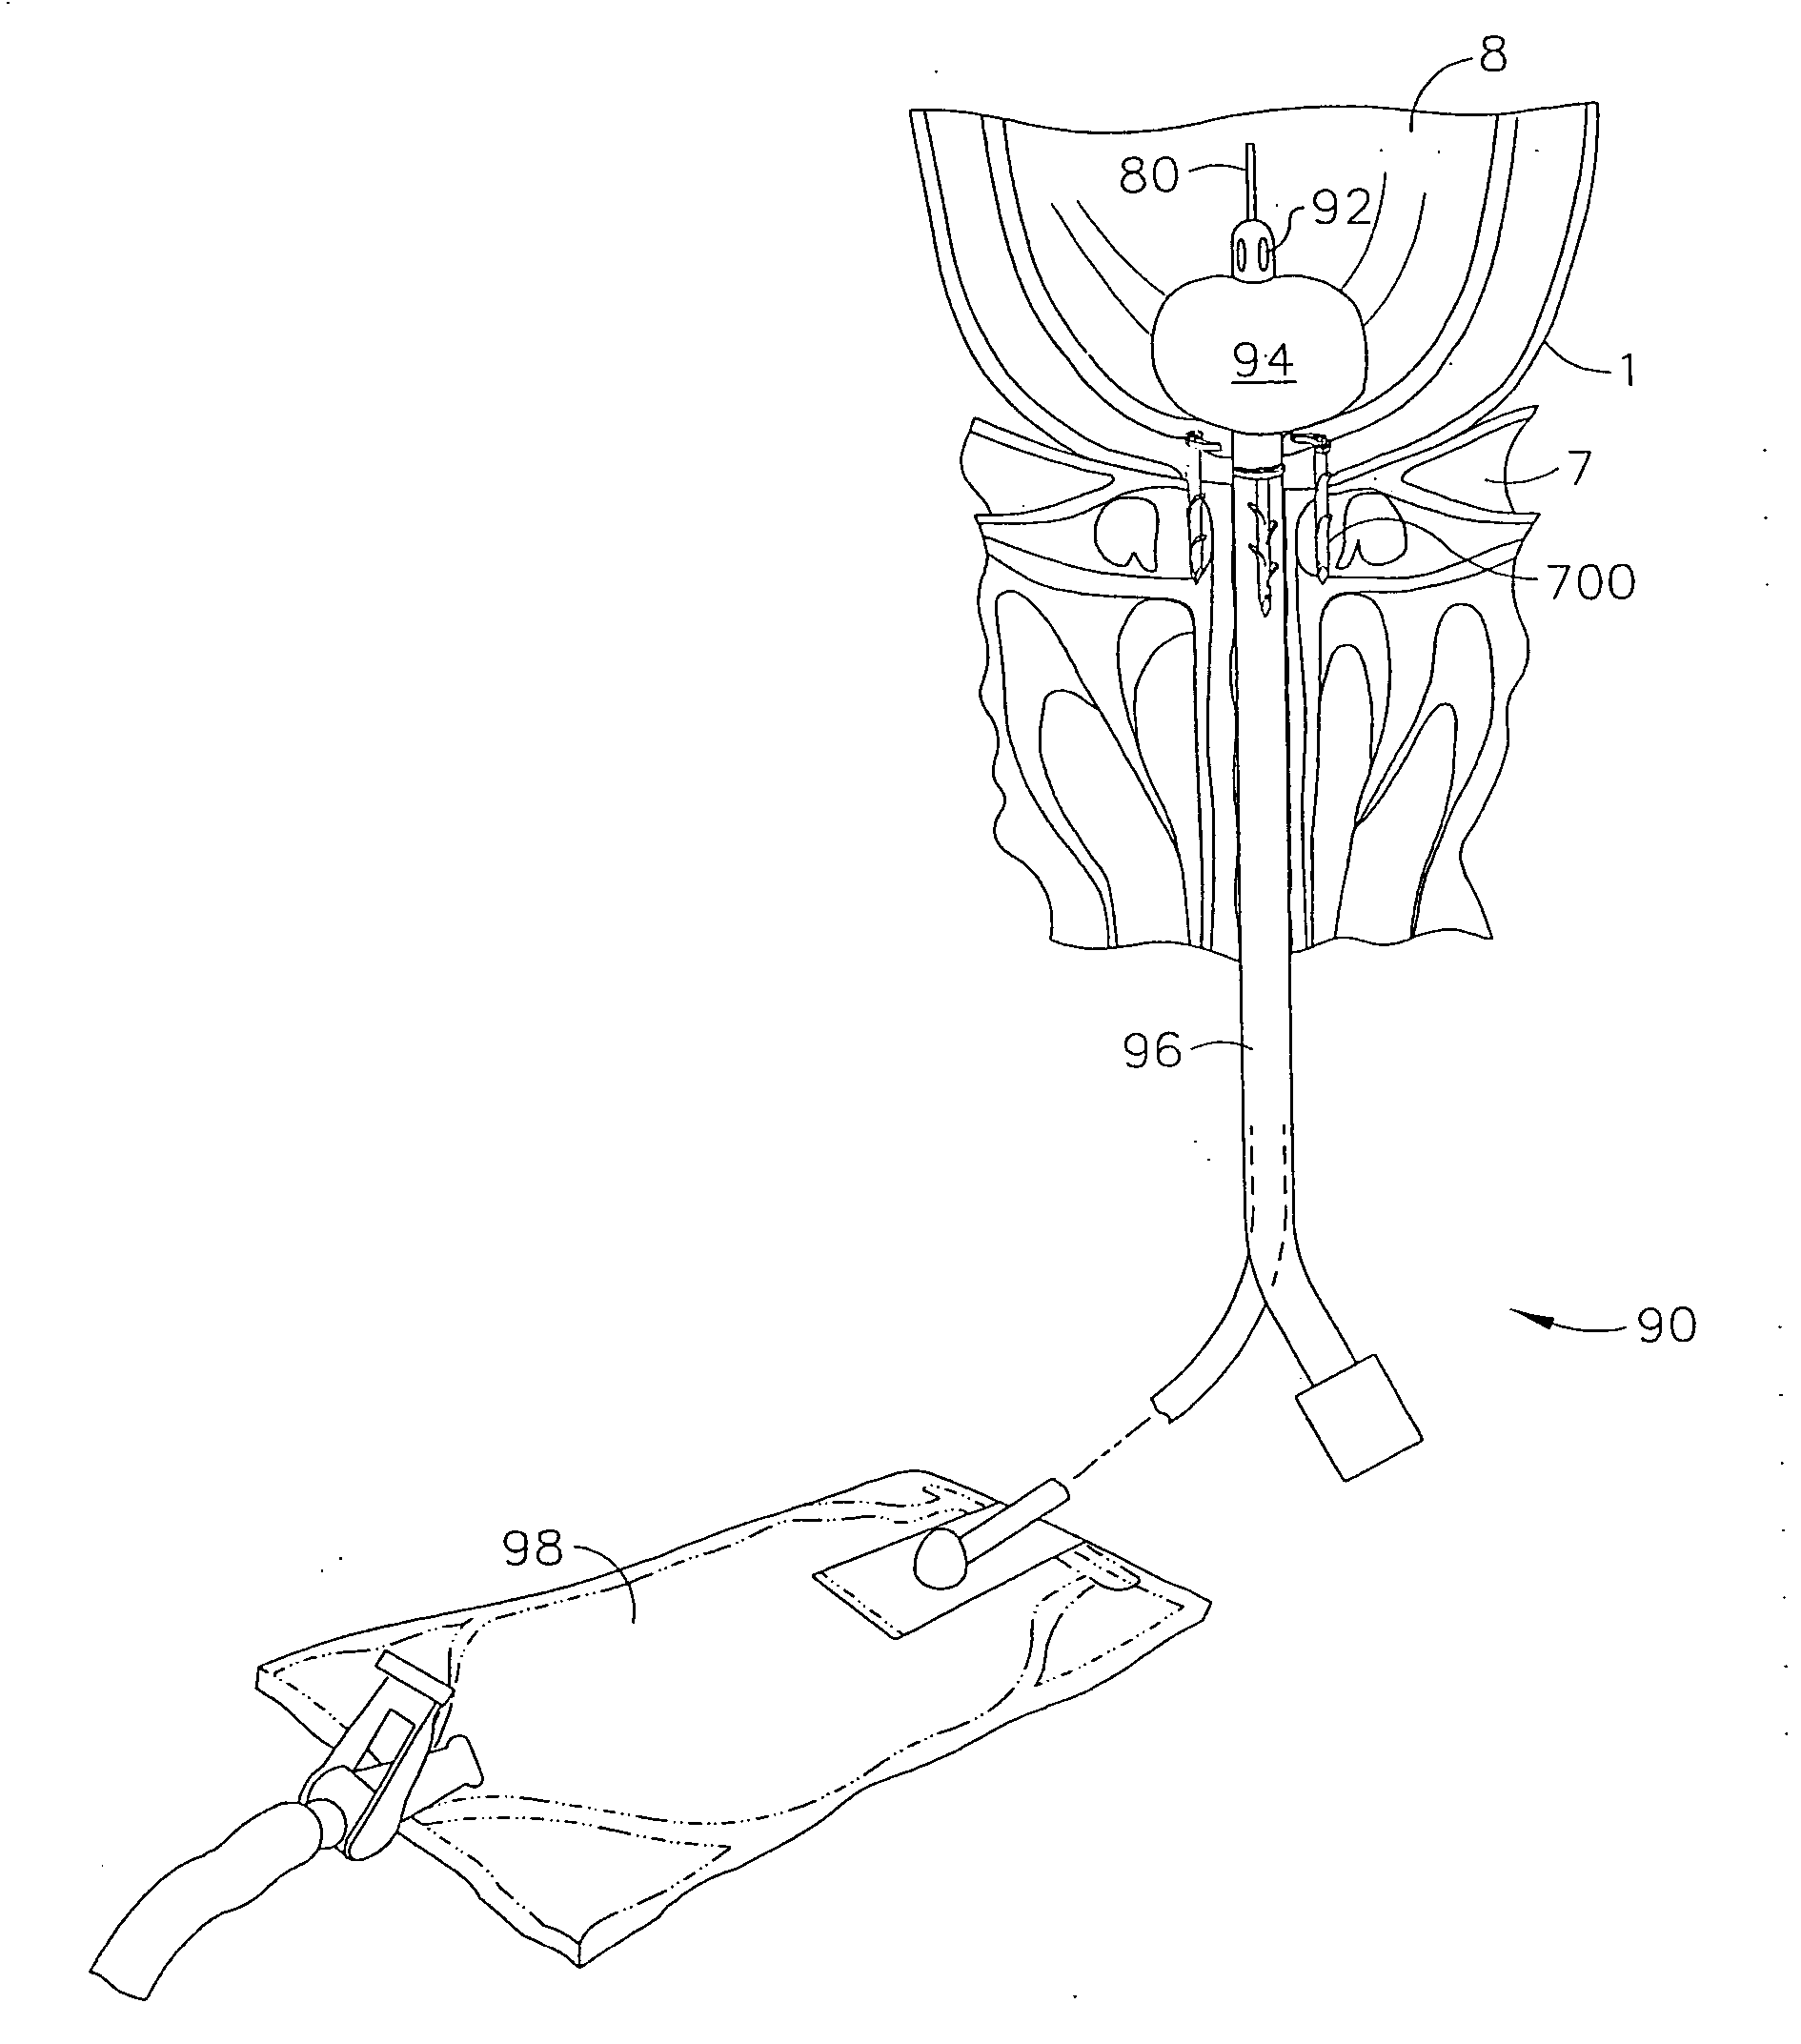 Method and instrument for effecting anastomosis of respective tissues defining two body lumens